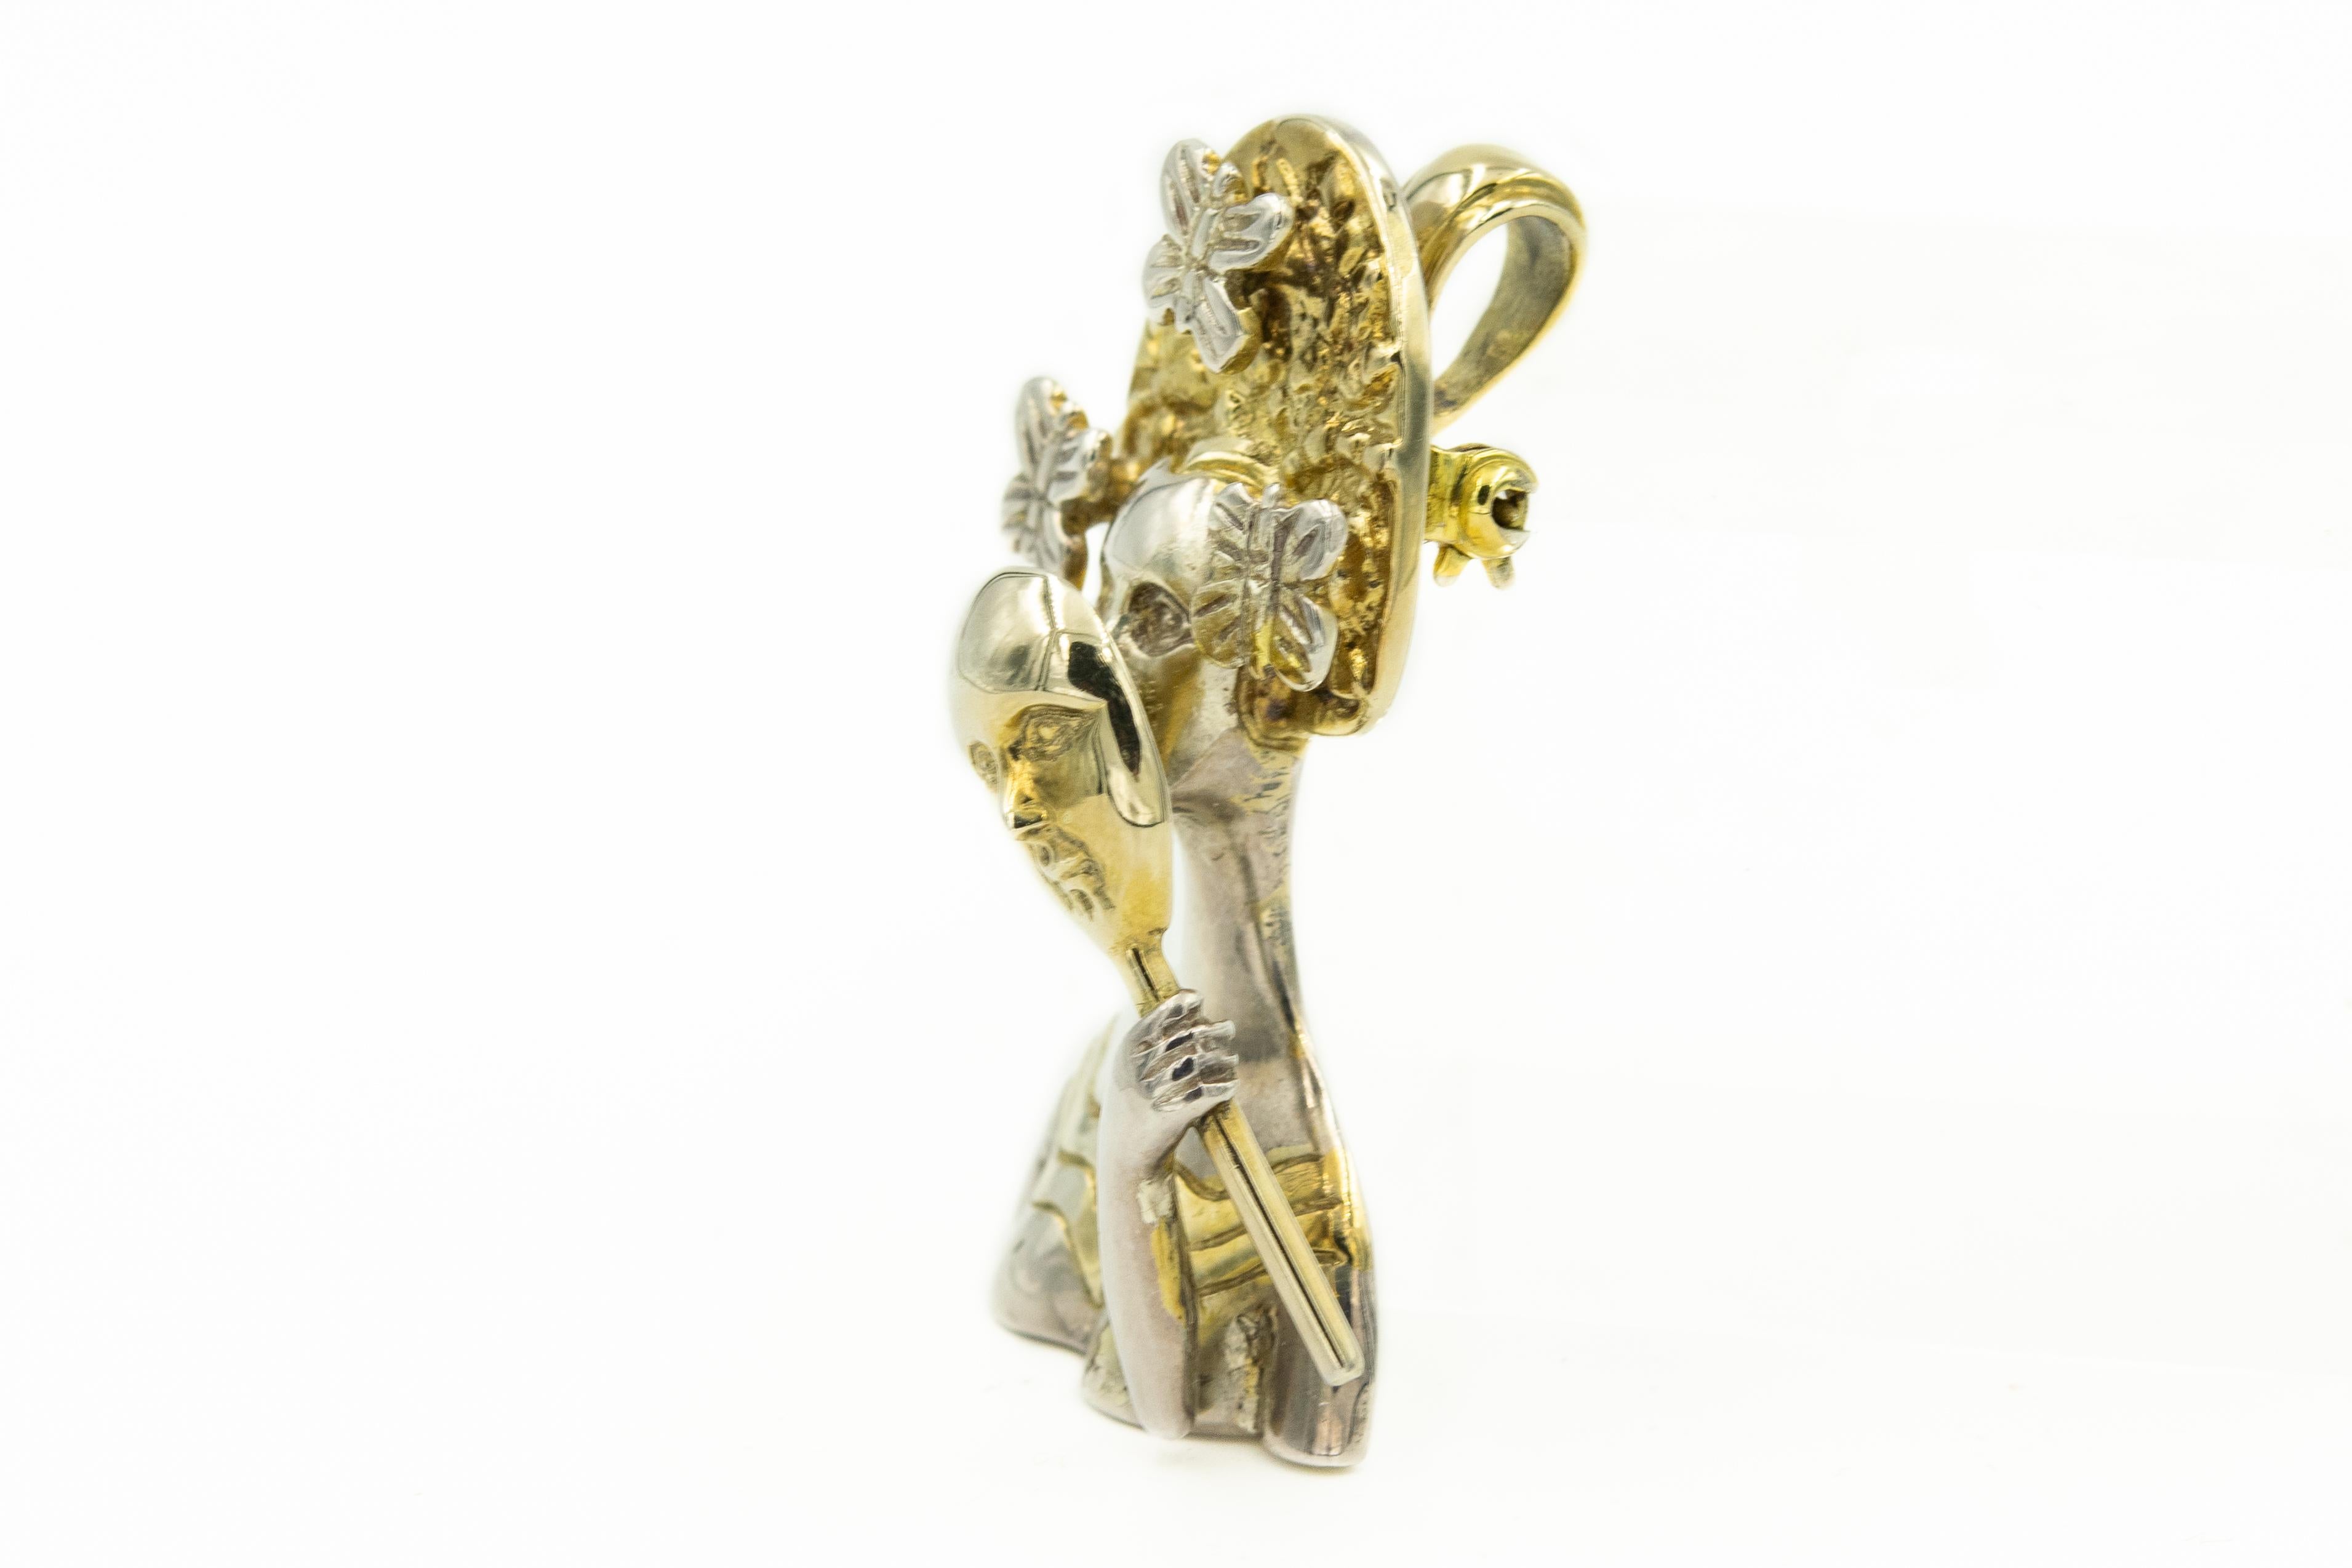 Stunning signed by artist Sergio Bustamante sterling silver and gold vermeil (24k god plating) pendant brooch. The pendant depicts the bust of a surreally beautiful woman with butterflies around her head holding a masquerade type mask in front of